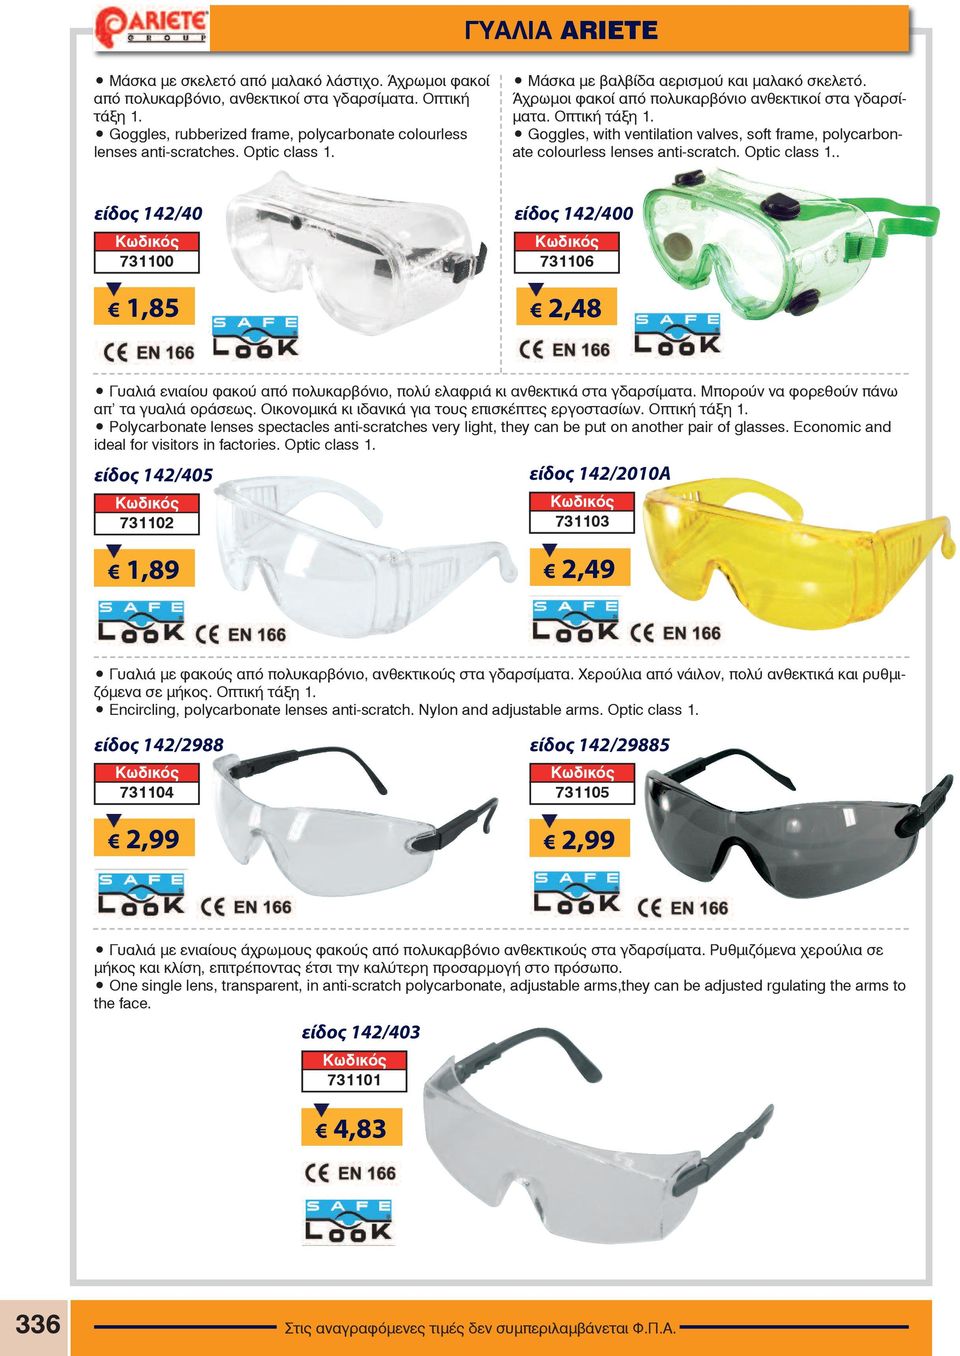 Goggles, with ventilation valves, soft frame, polycarbonate colourless lenses anti-scratch. Optic class 1.